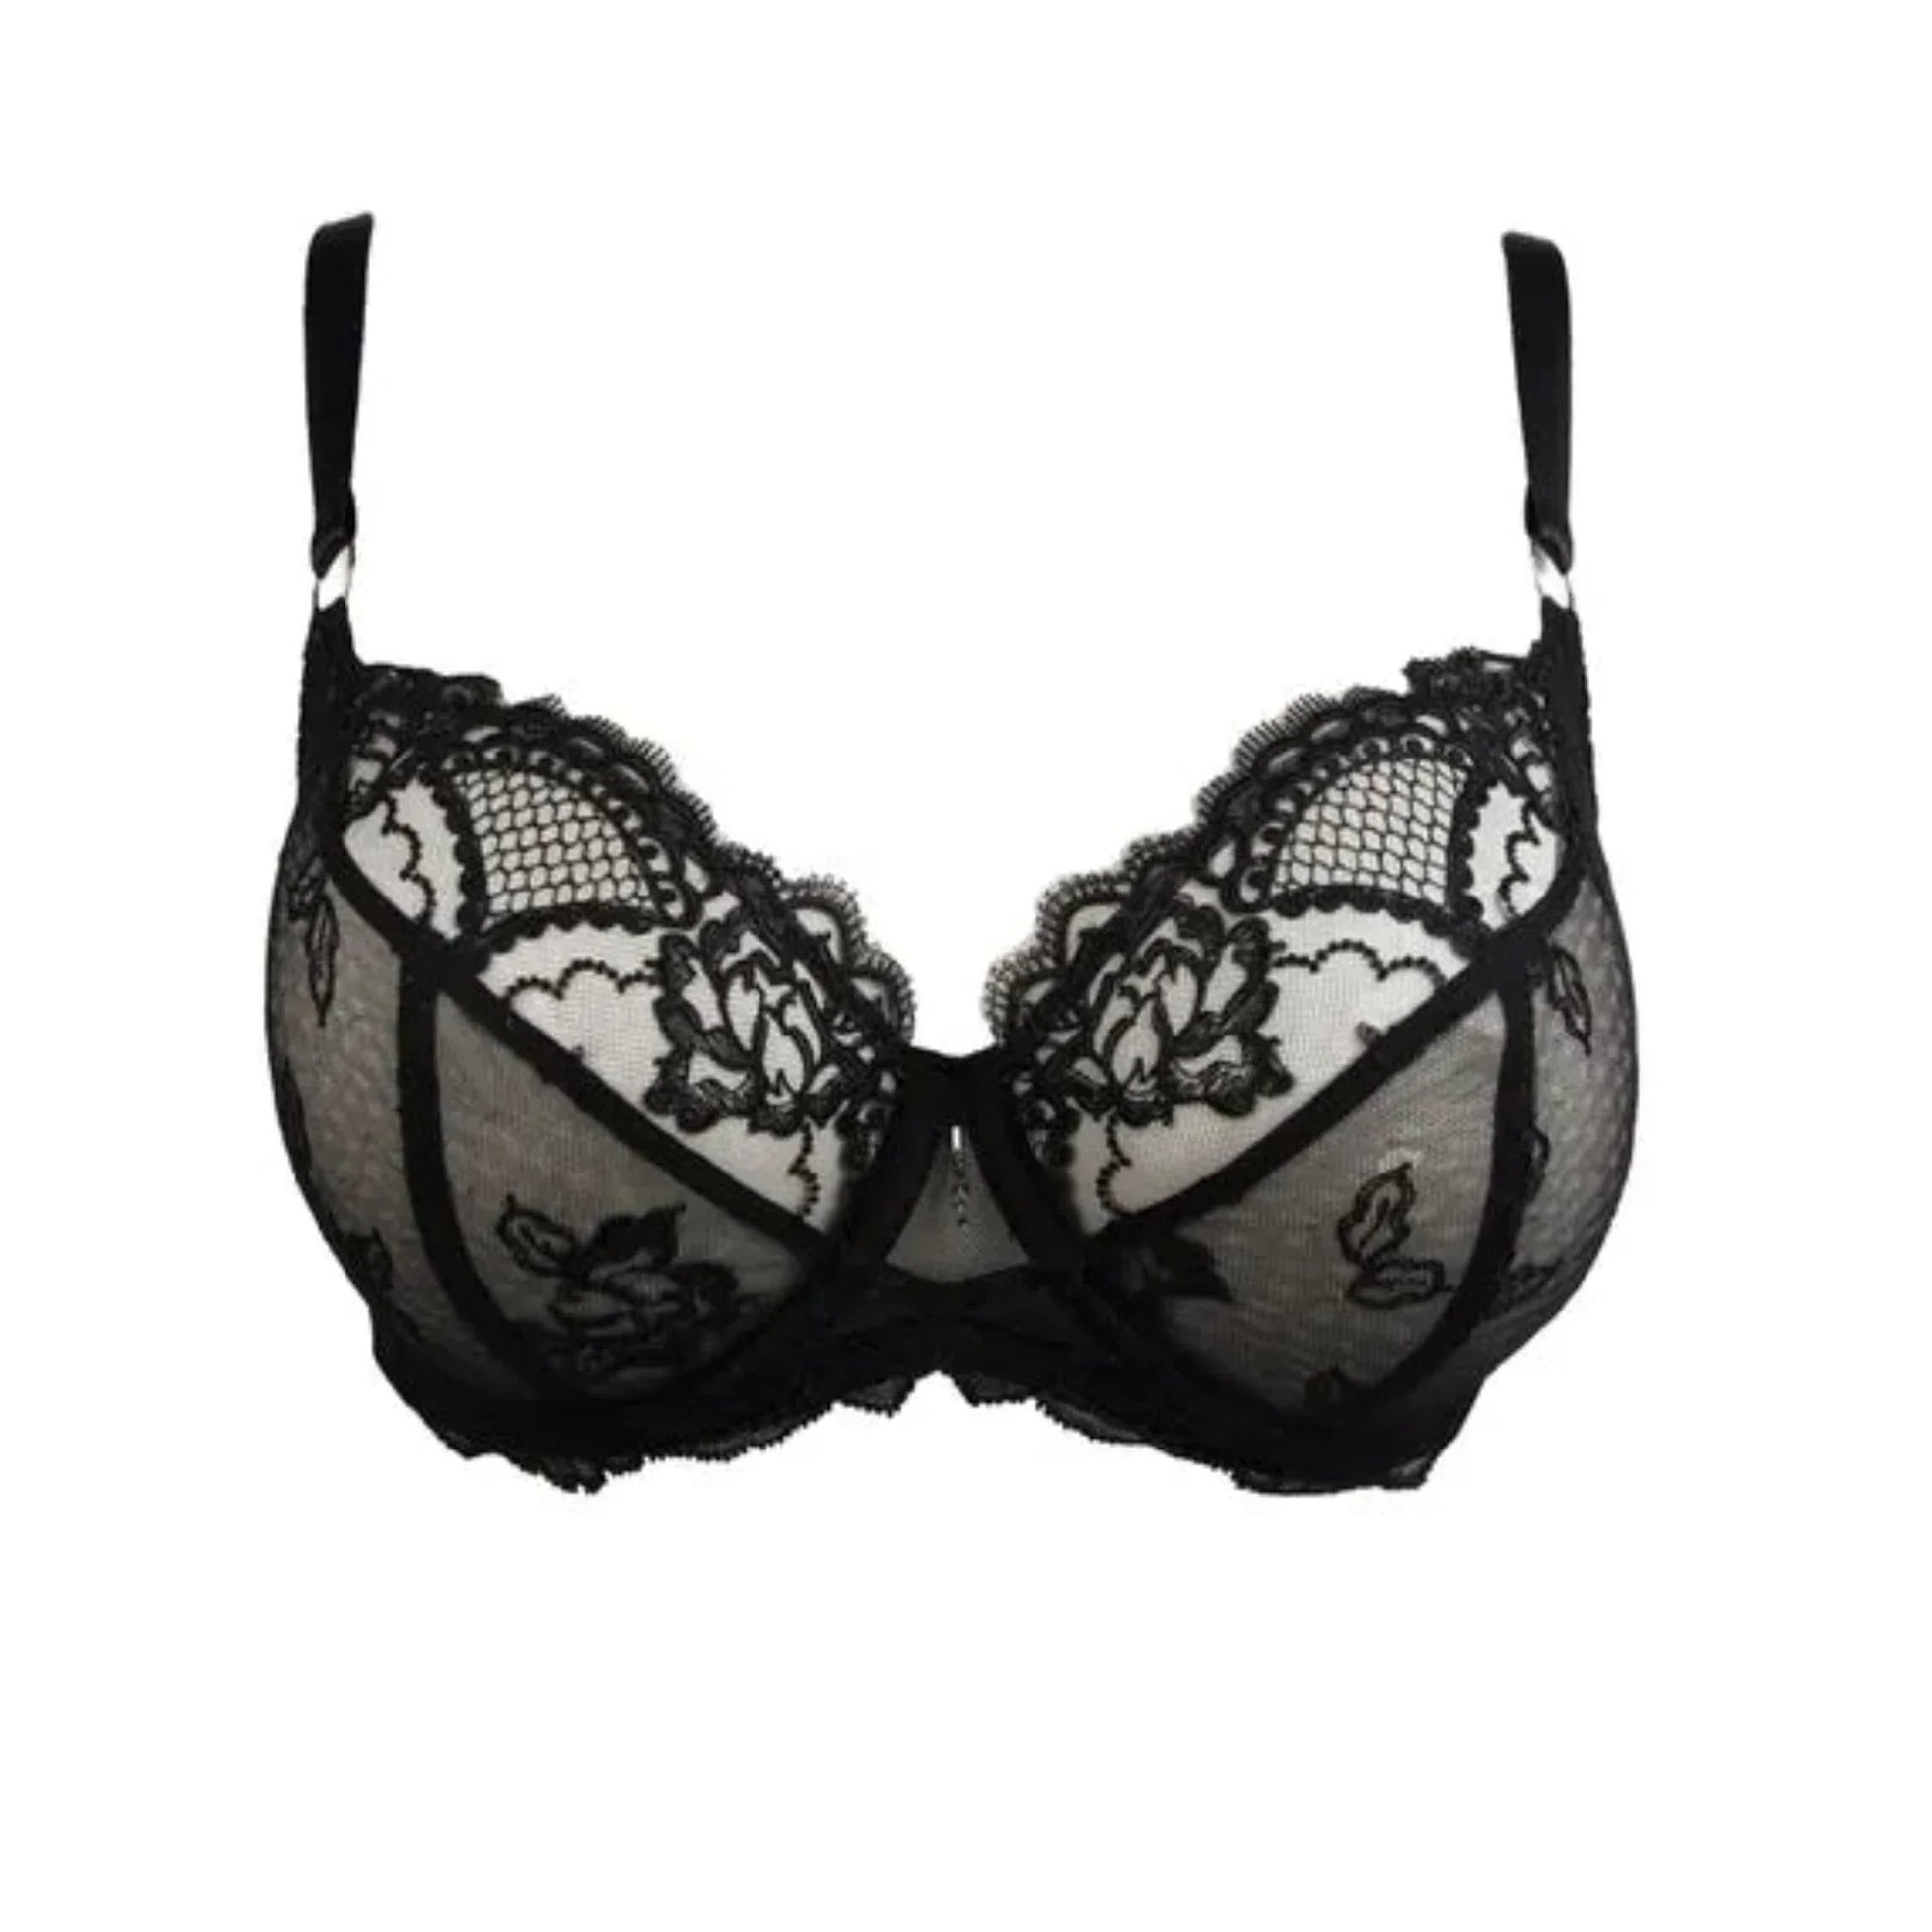 Underwired triangle bra in delicate Calais Leavers lace. Lise Charmel